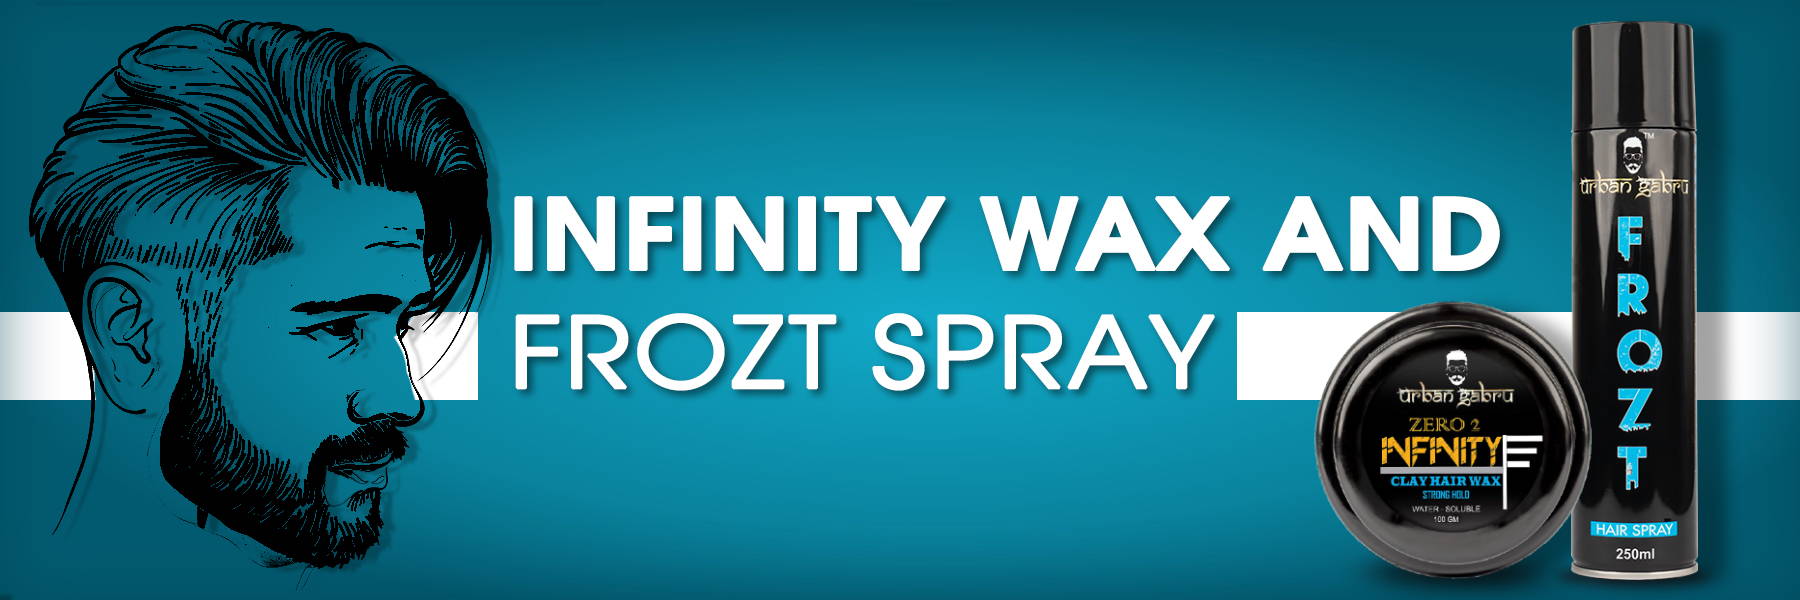 infinity wax and frozt spray